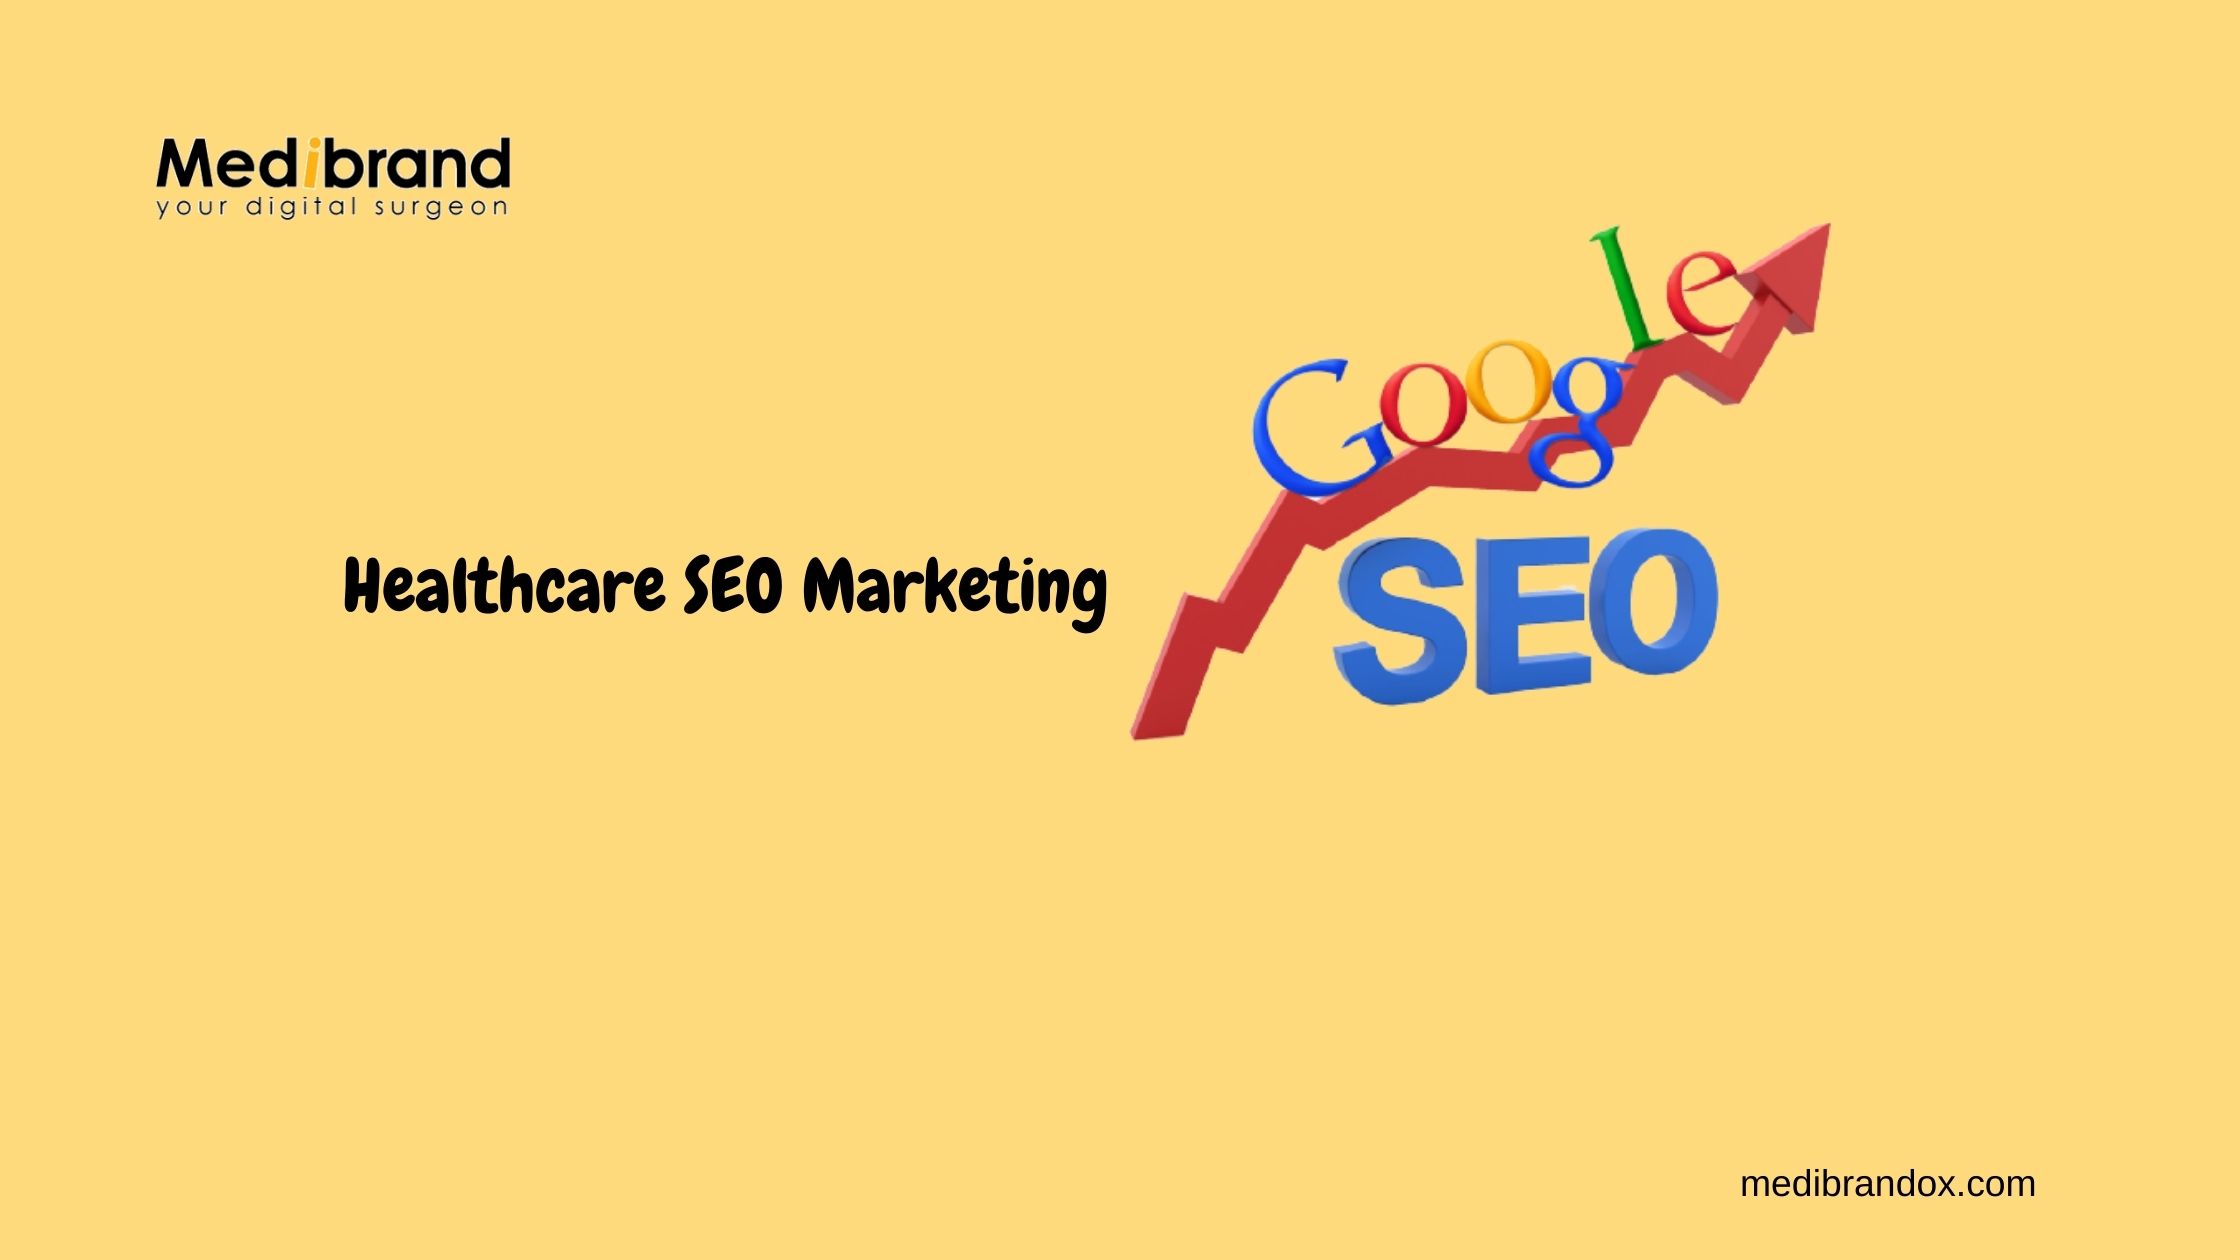 Article about Best Healthcare SEO Marketing Company